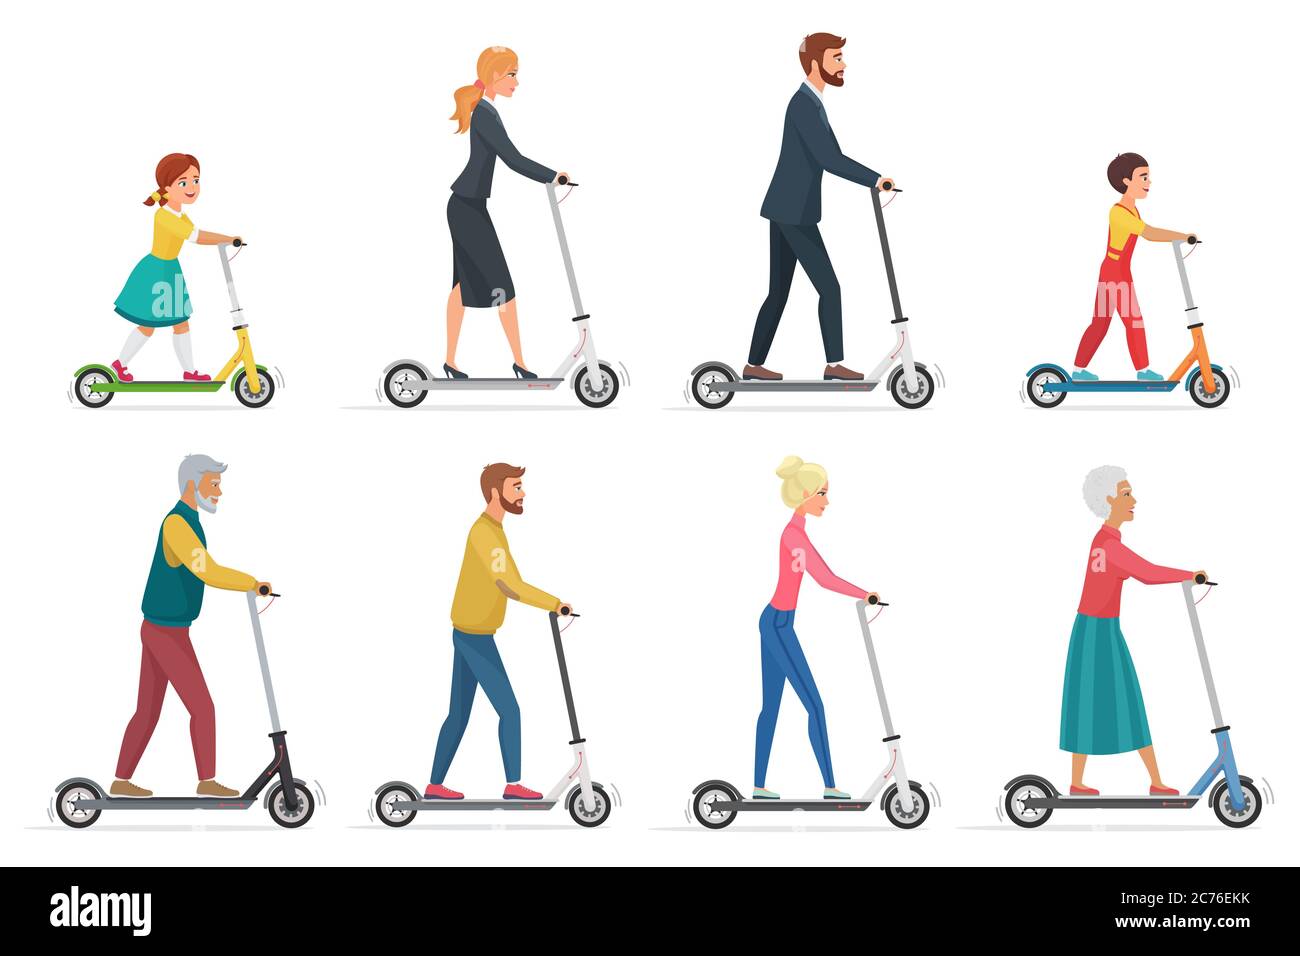 People on electric scooter set flat vector illustration. Male and female cartoon character riding ecologically clean urban vehicle. Family in formal, casual clothes using modern personal transporter Stock Vector